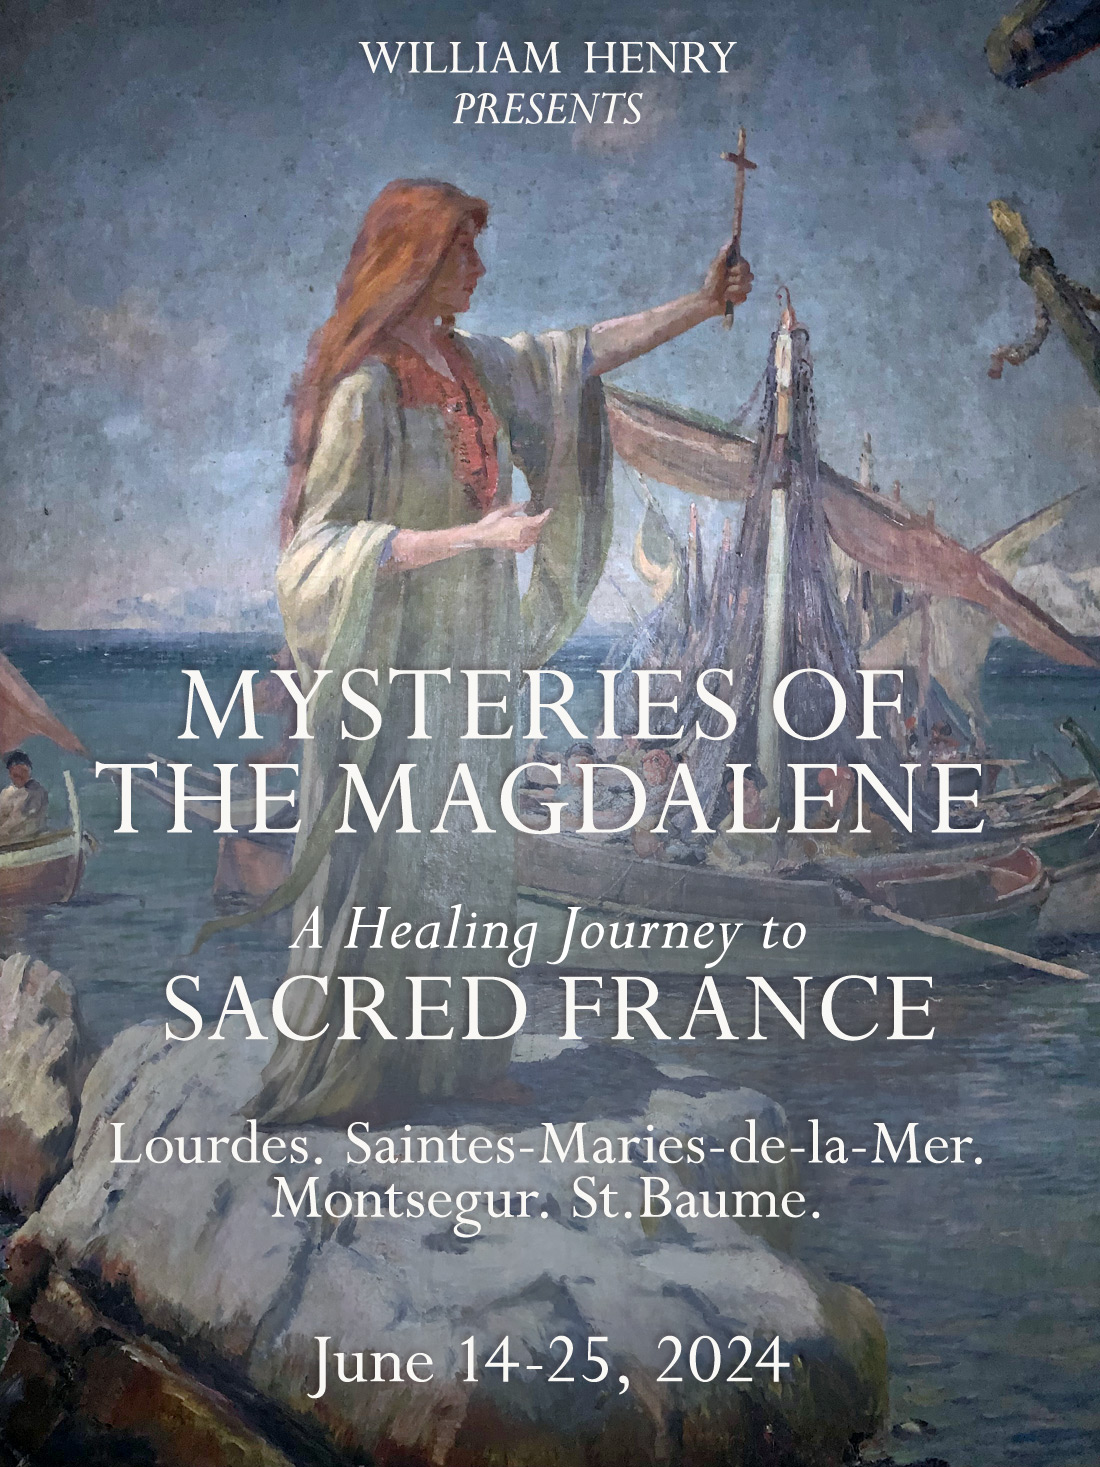 Mysteries of the Magdalene Tour